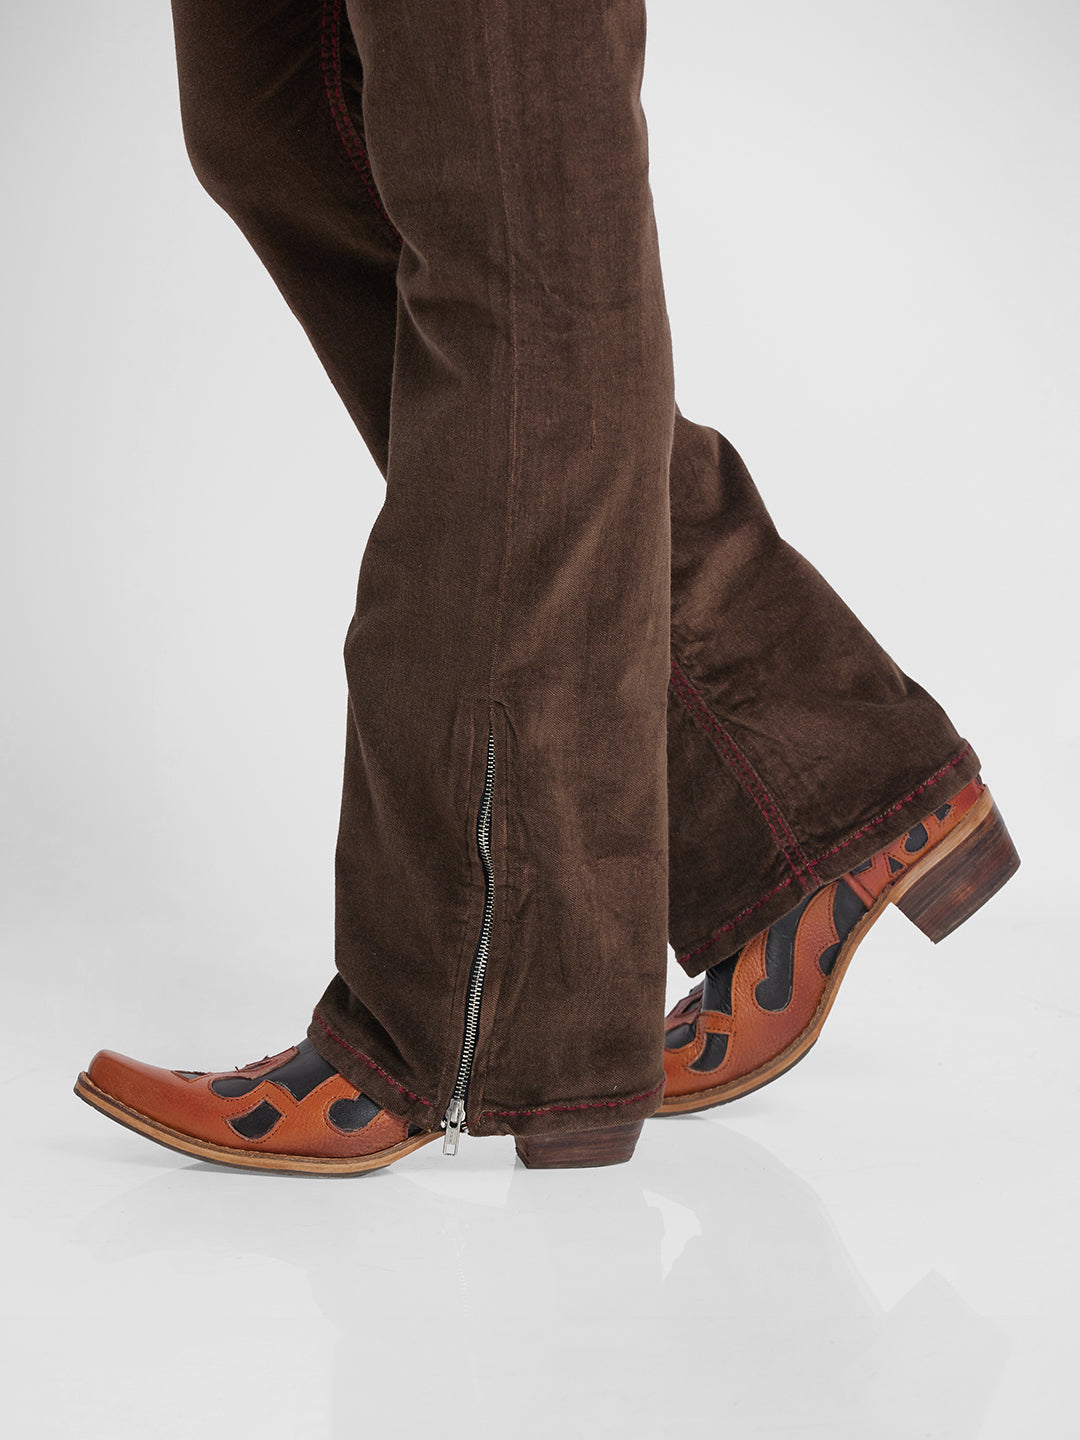 Brown Bootcut Corduroy With Maroon Saddle Stitch And Bottom Zipper